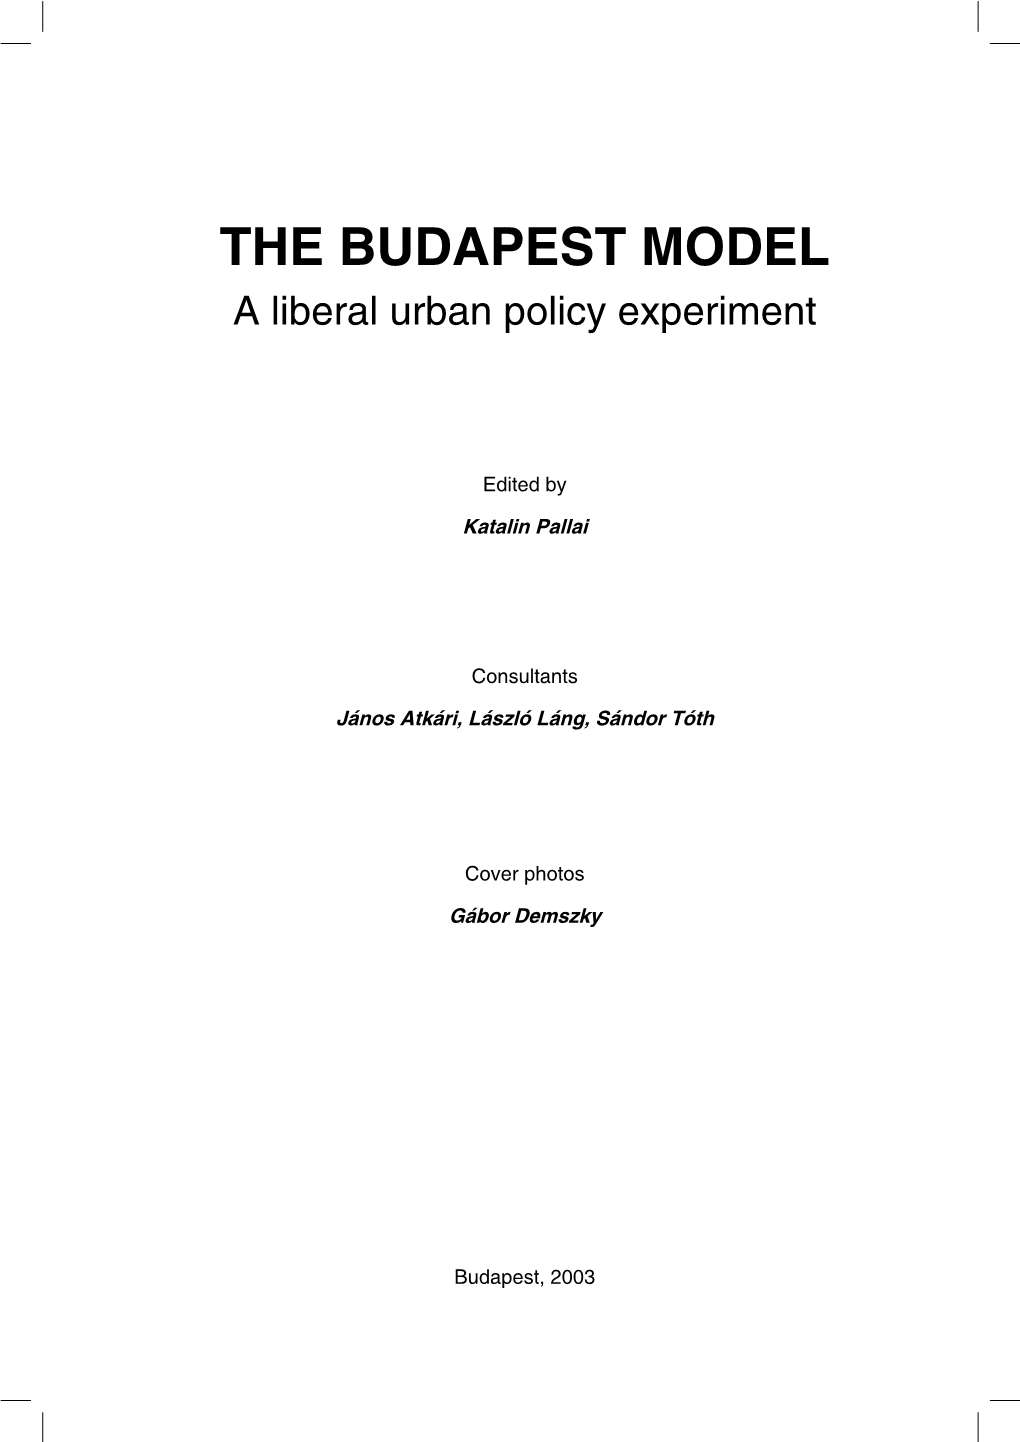 THE BUDAPEST MODEL a Liberal Urban Policy Experiment